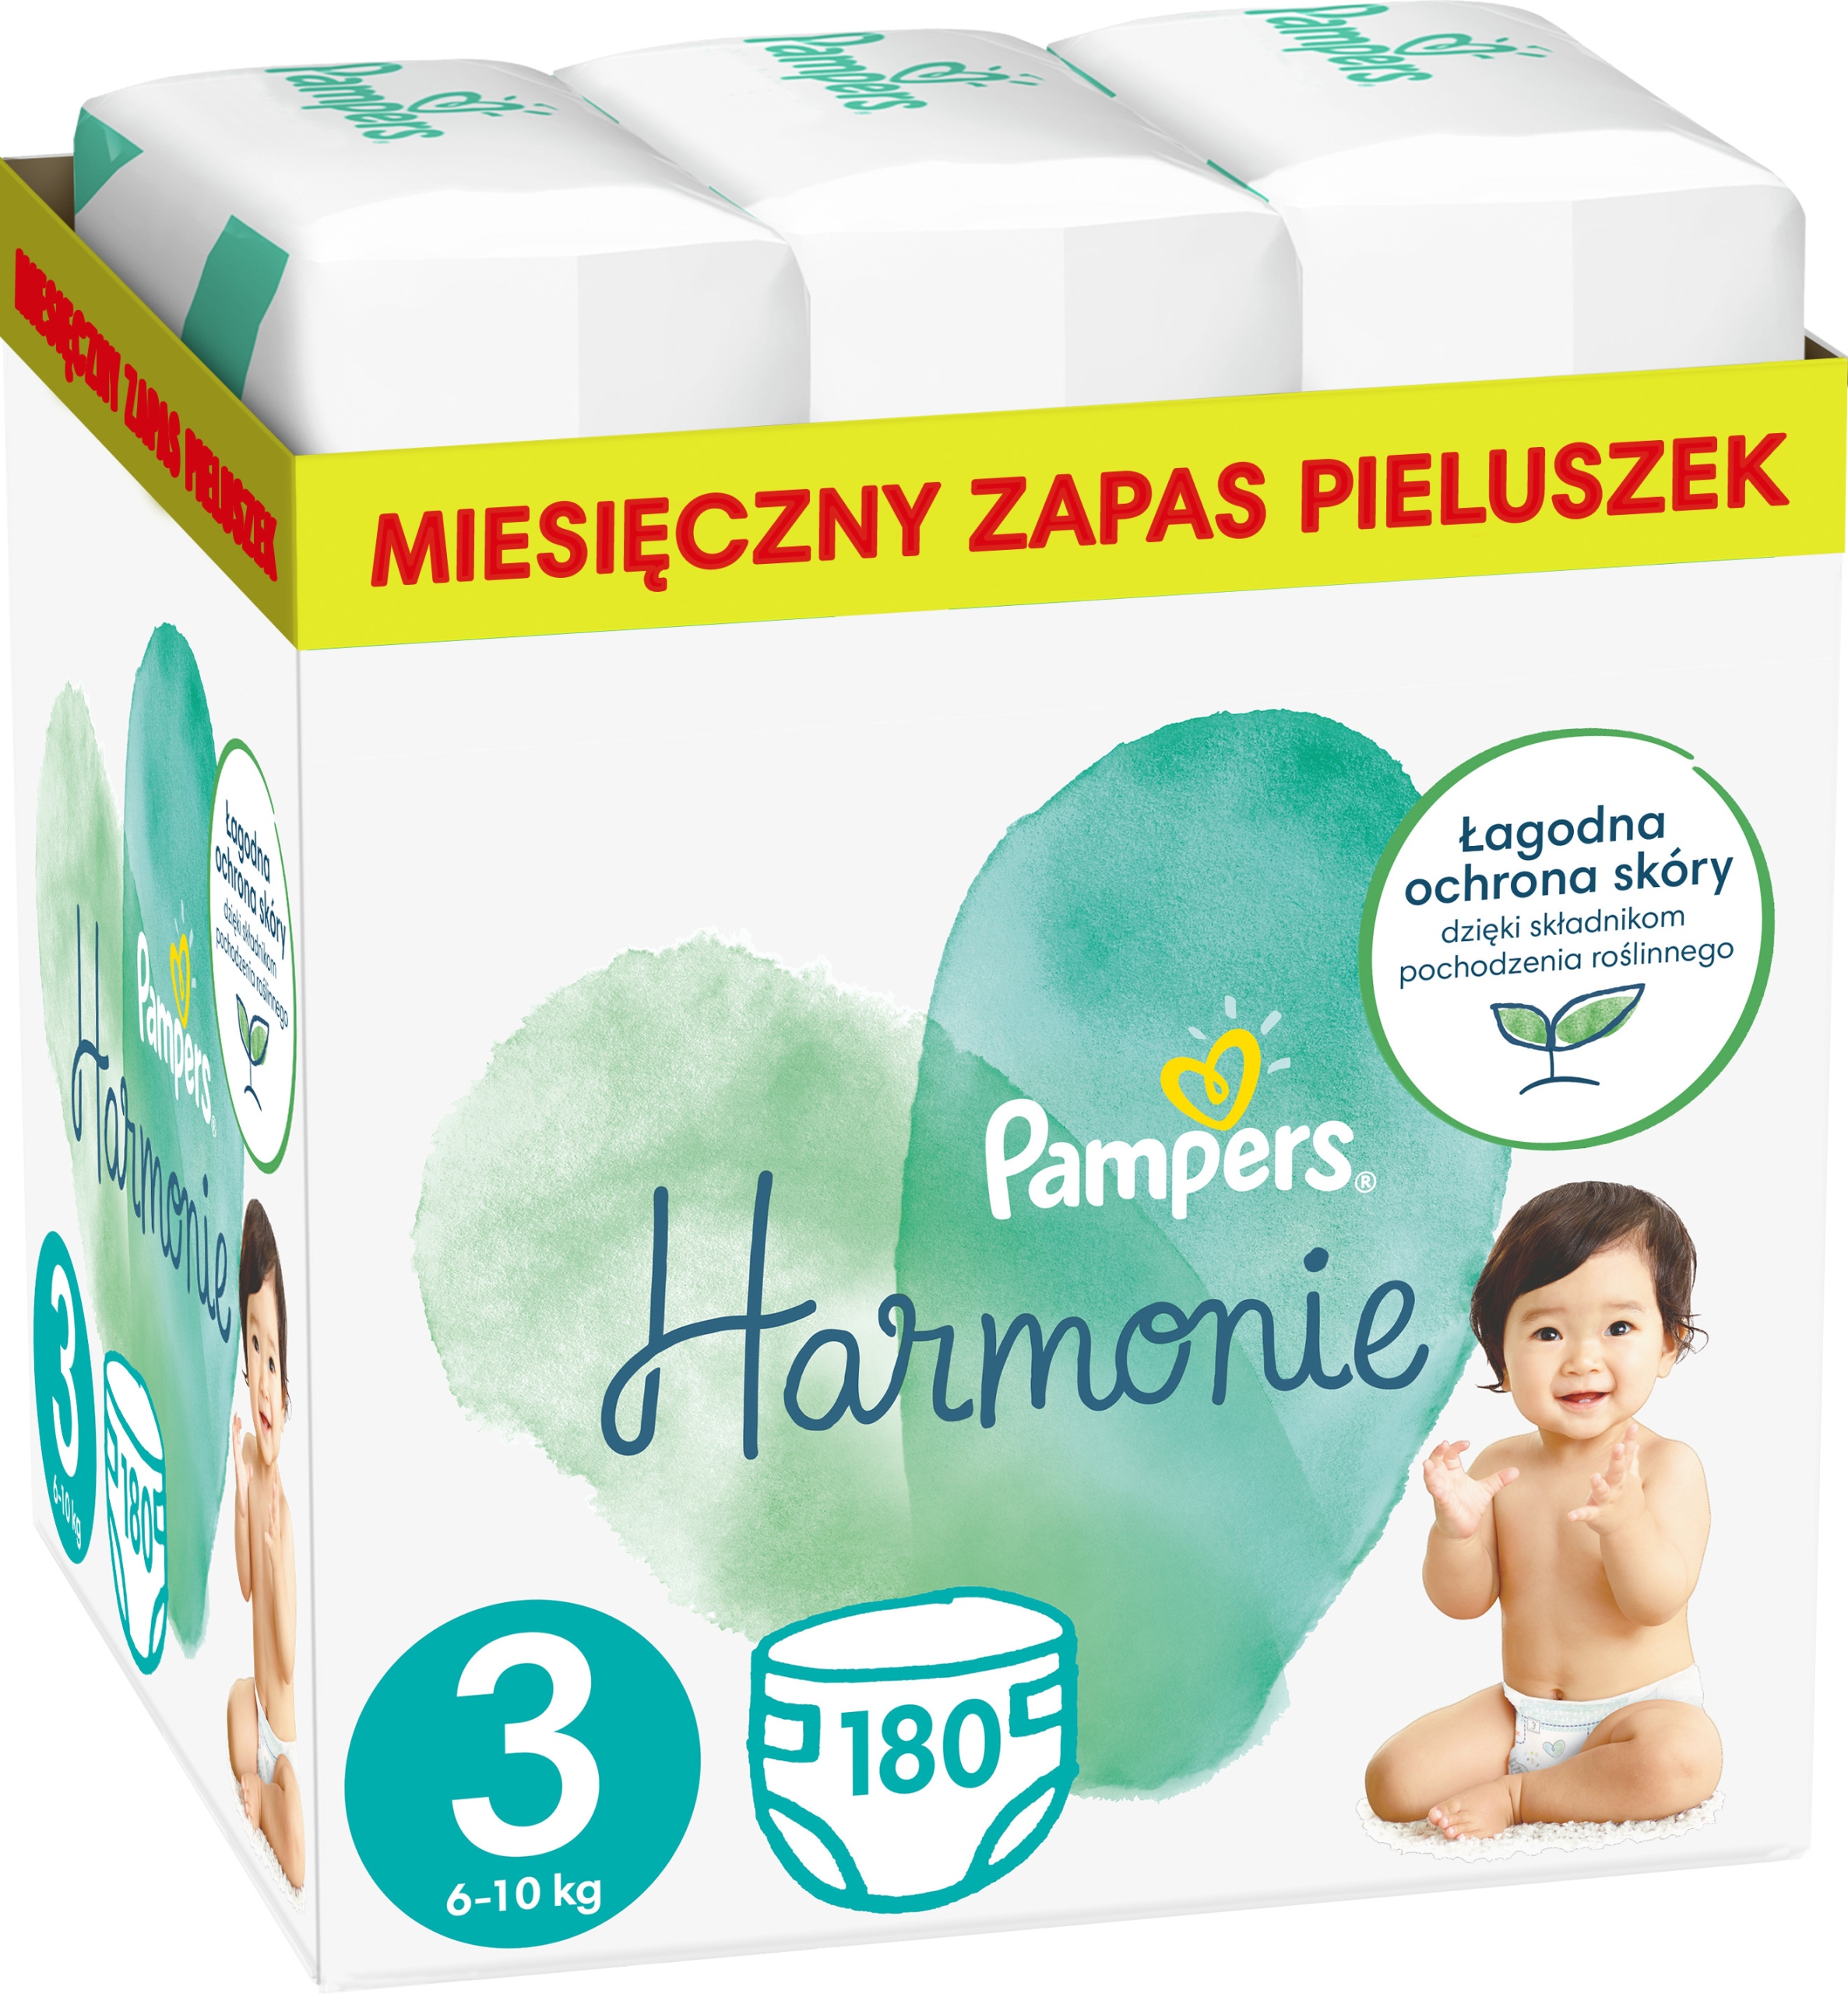 pampers active baby 3 ceneo